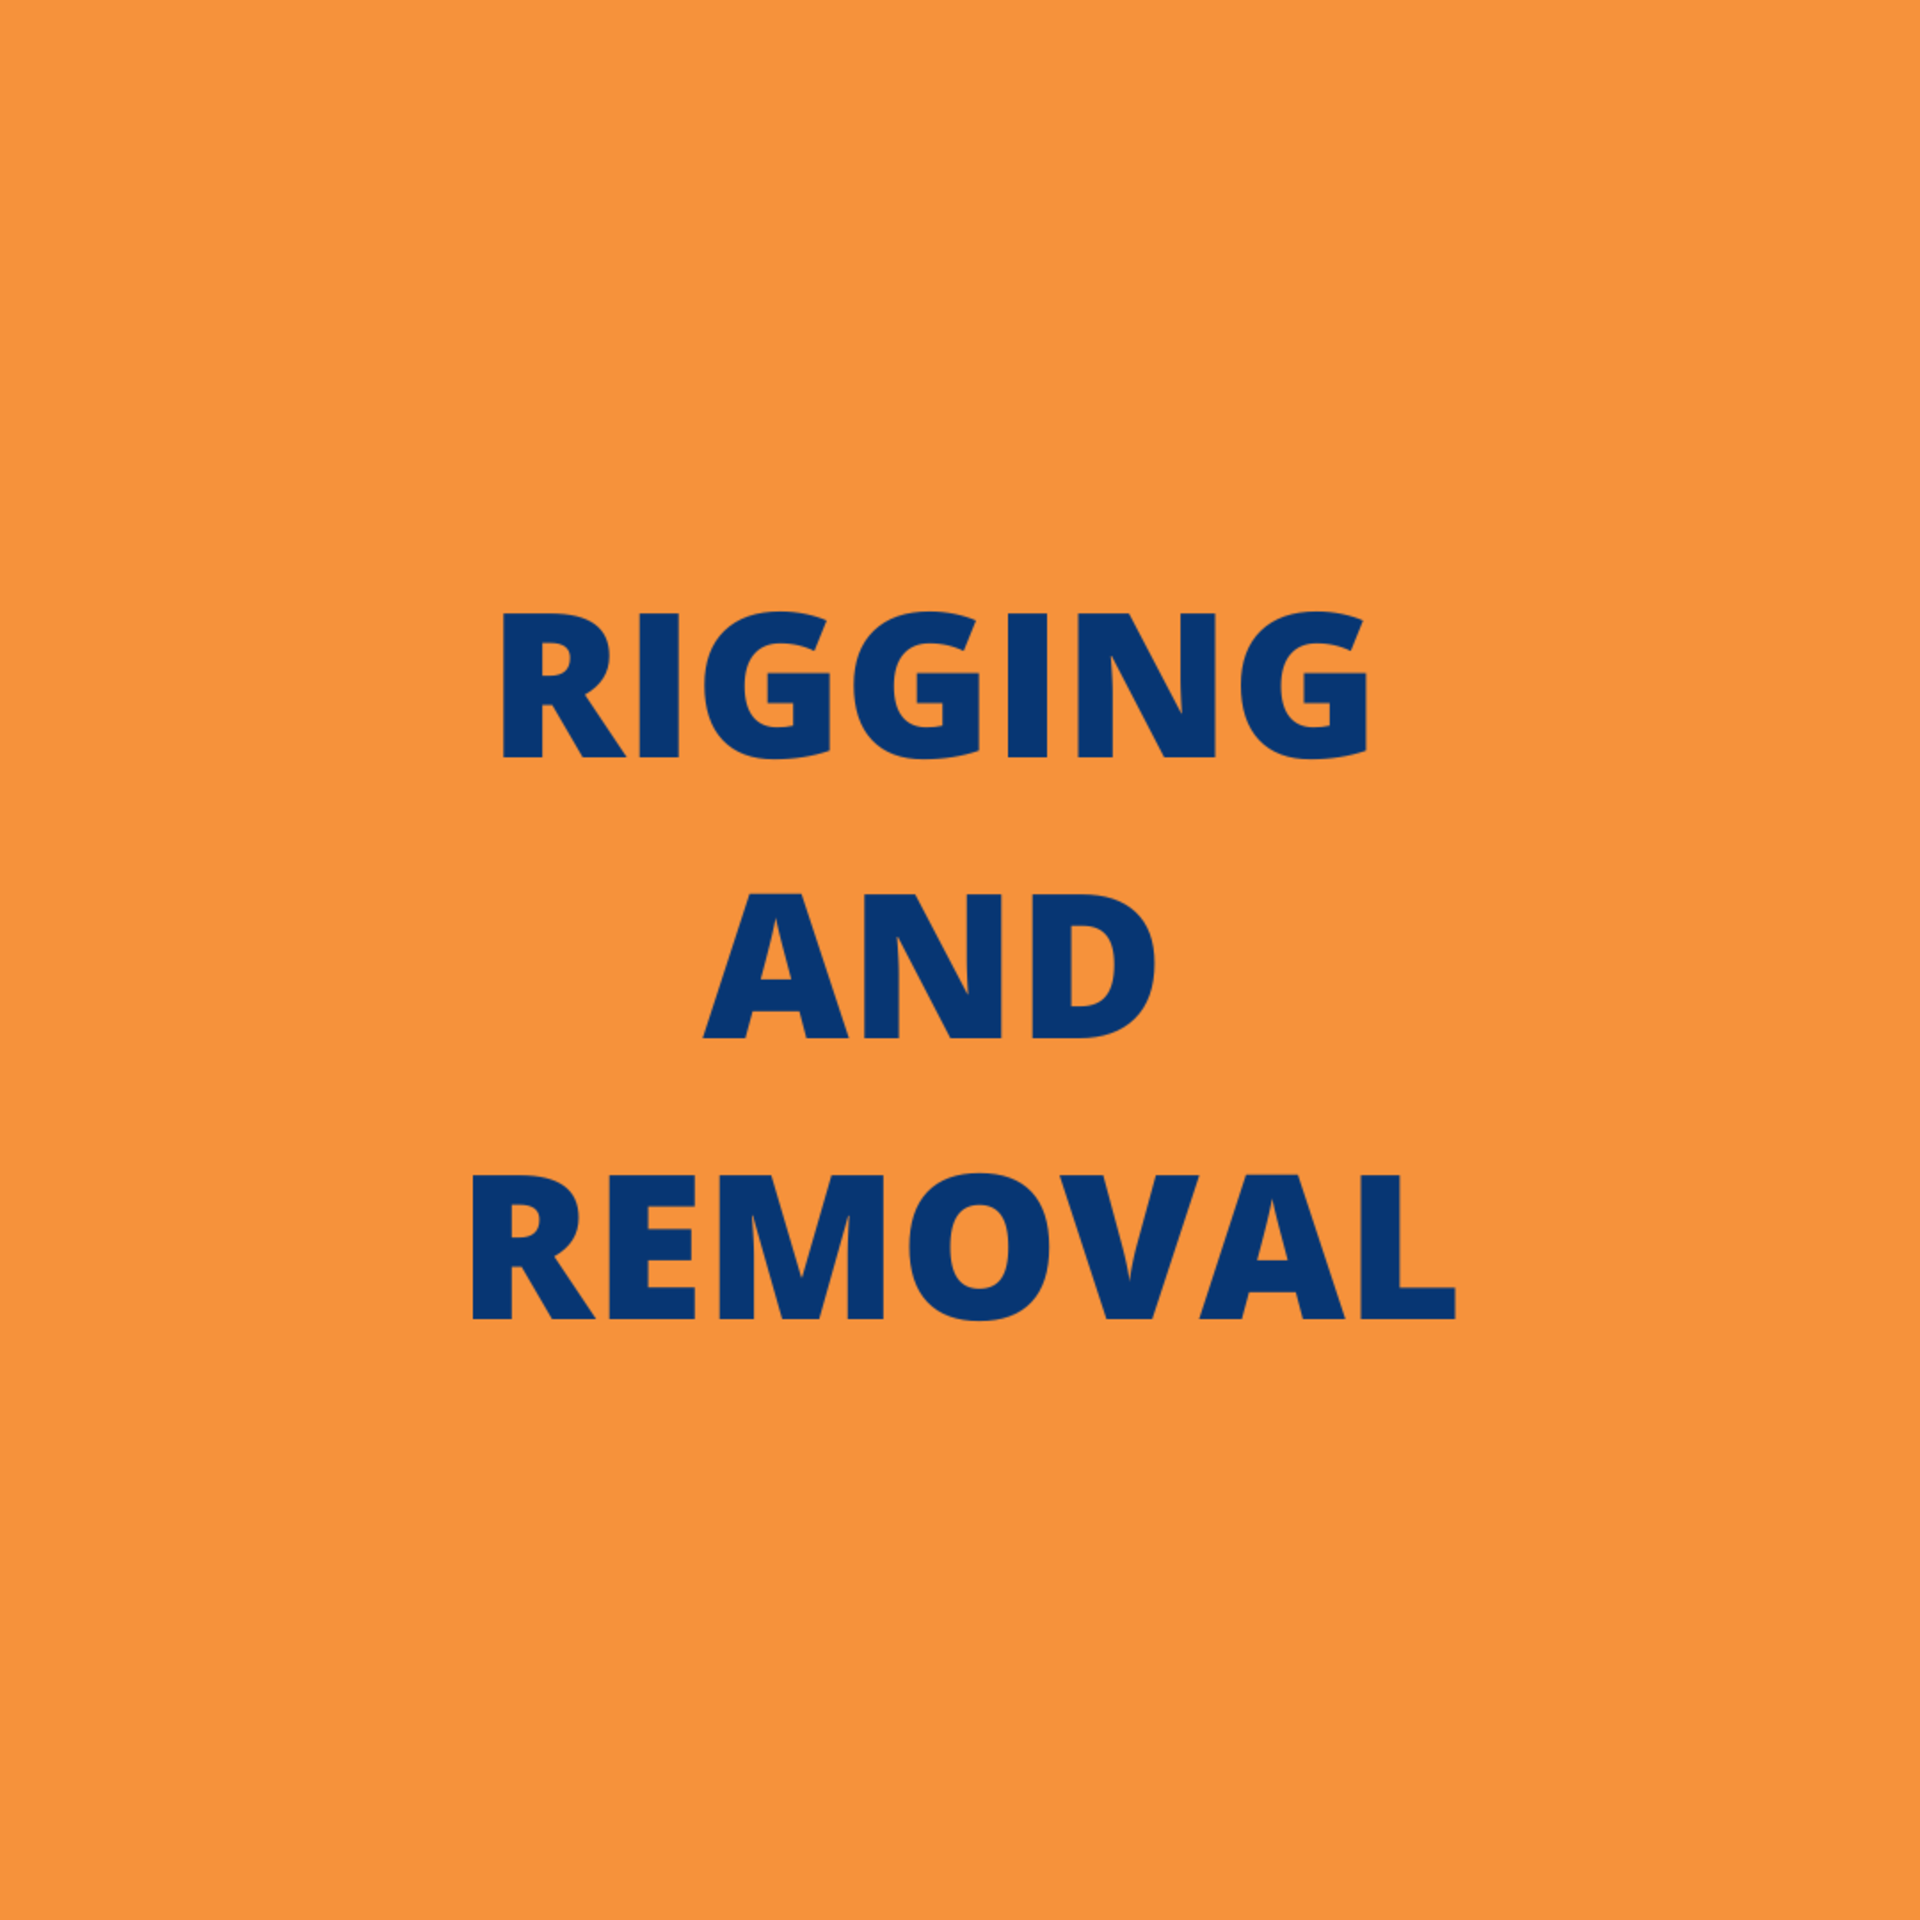 Rigging and Removal